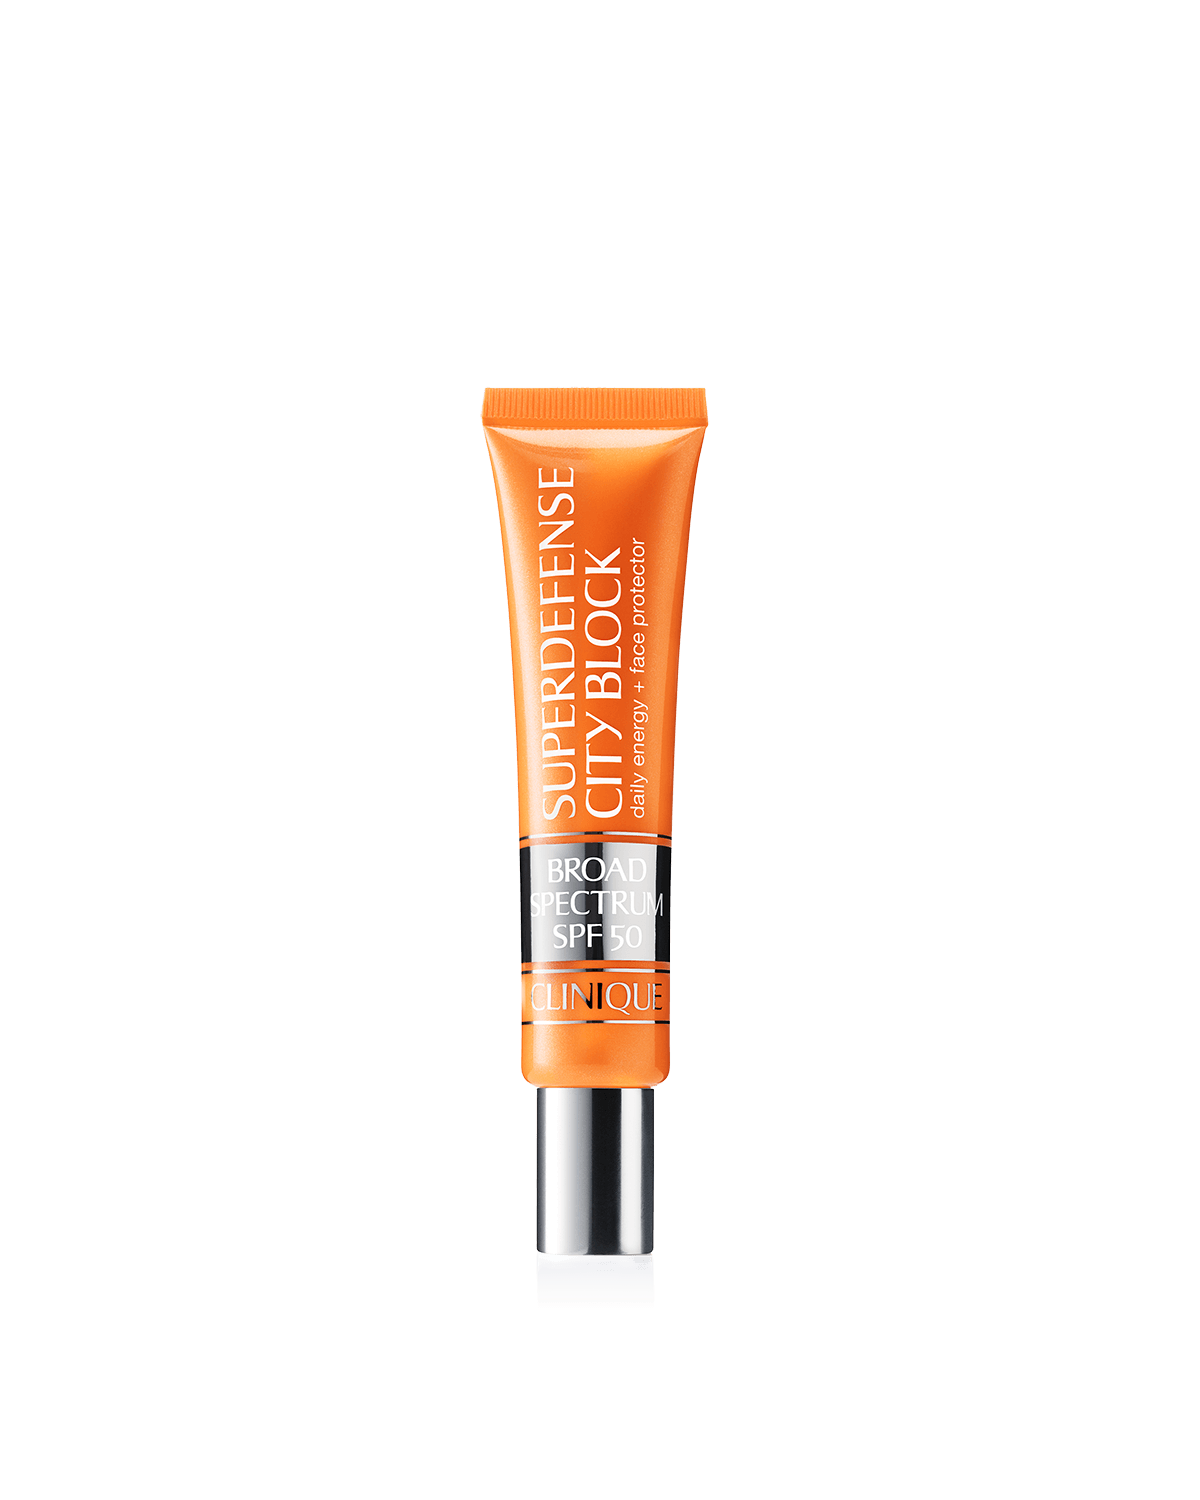 Superdefense™ City Block Broad Spectrum SPF 50 Daily Energy + Face Protector